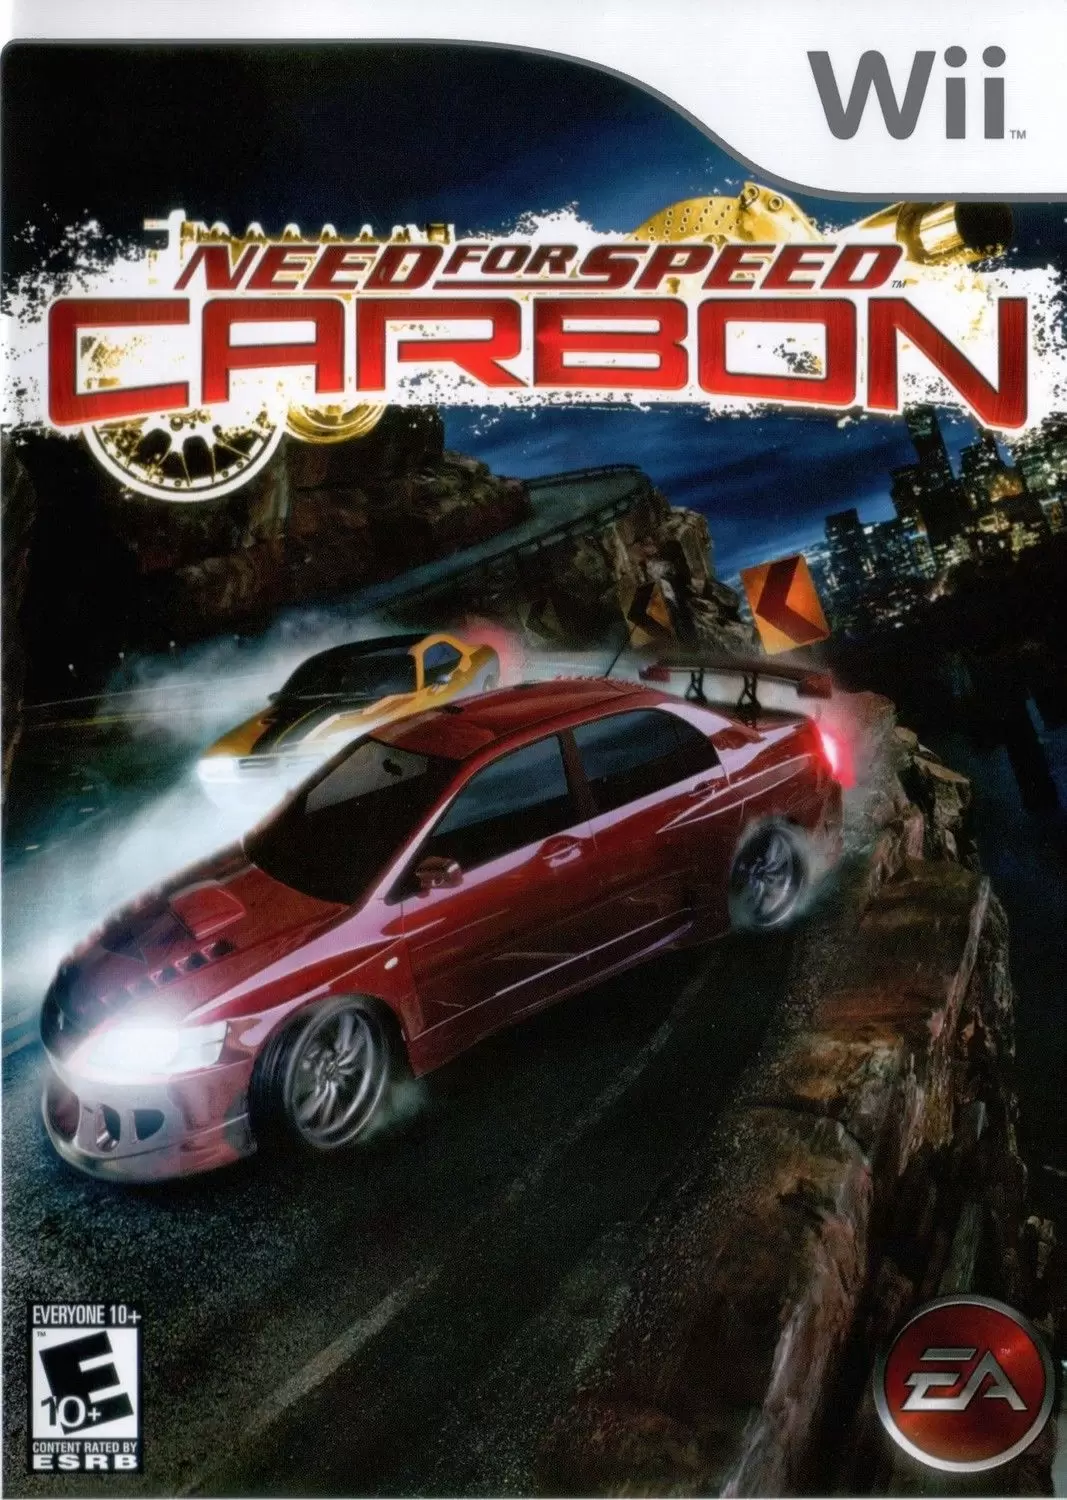 Nintendo Wii Games - Need for Speed: Carbon